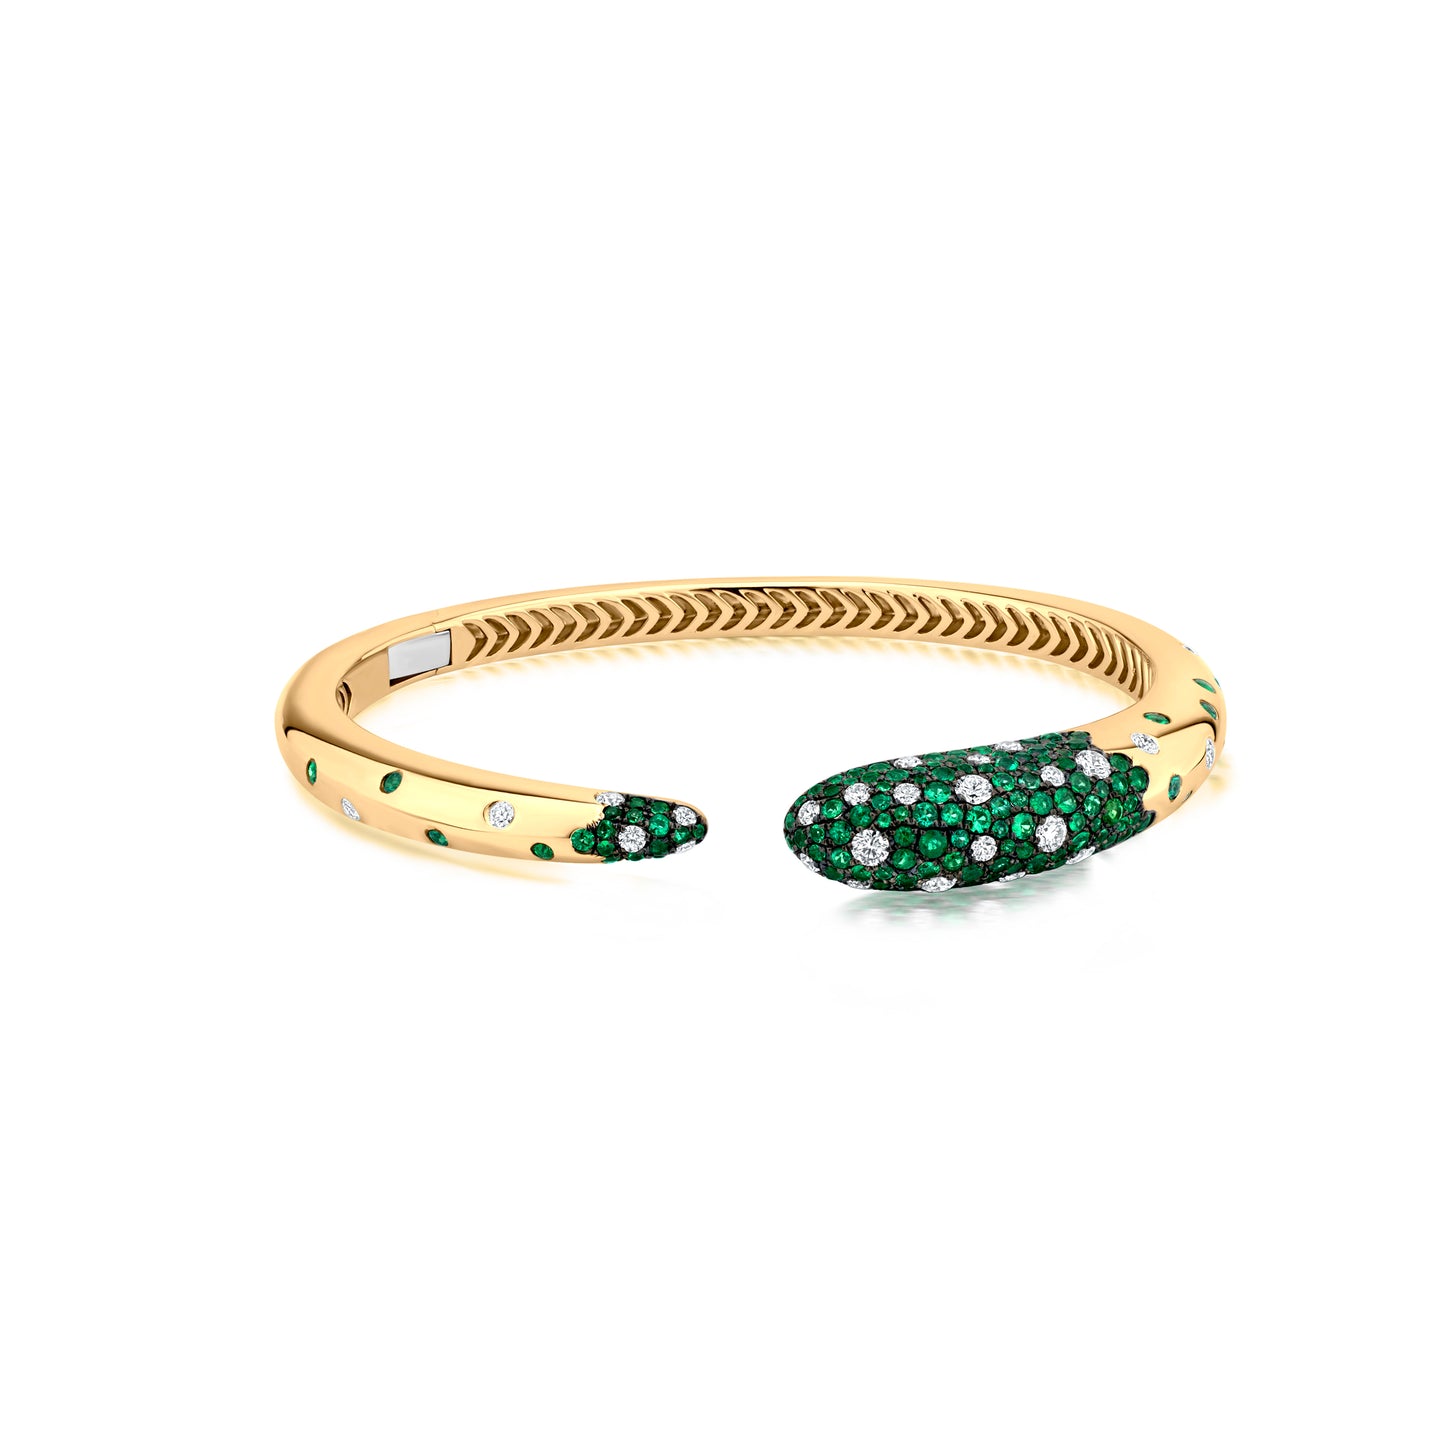 Bangle With Emerald And Diamond In 18K Yellow Gold And Black Rhodium